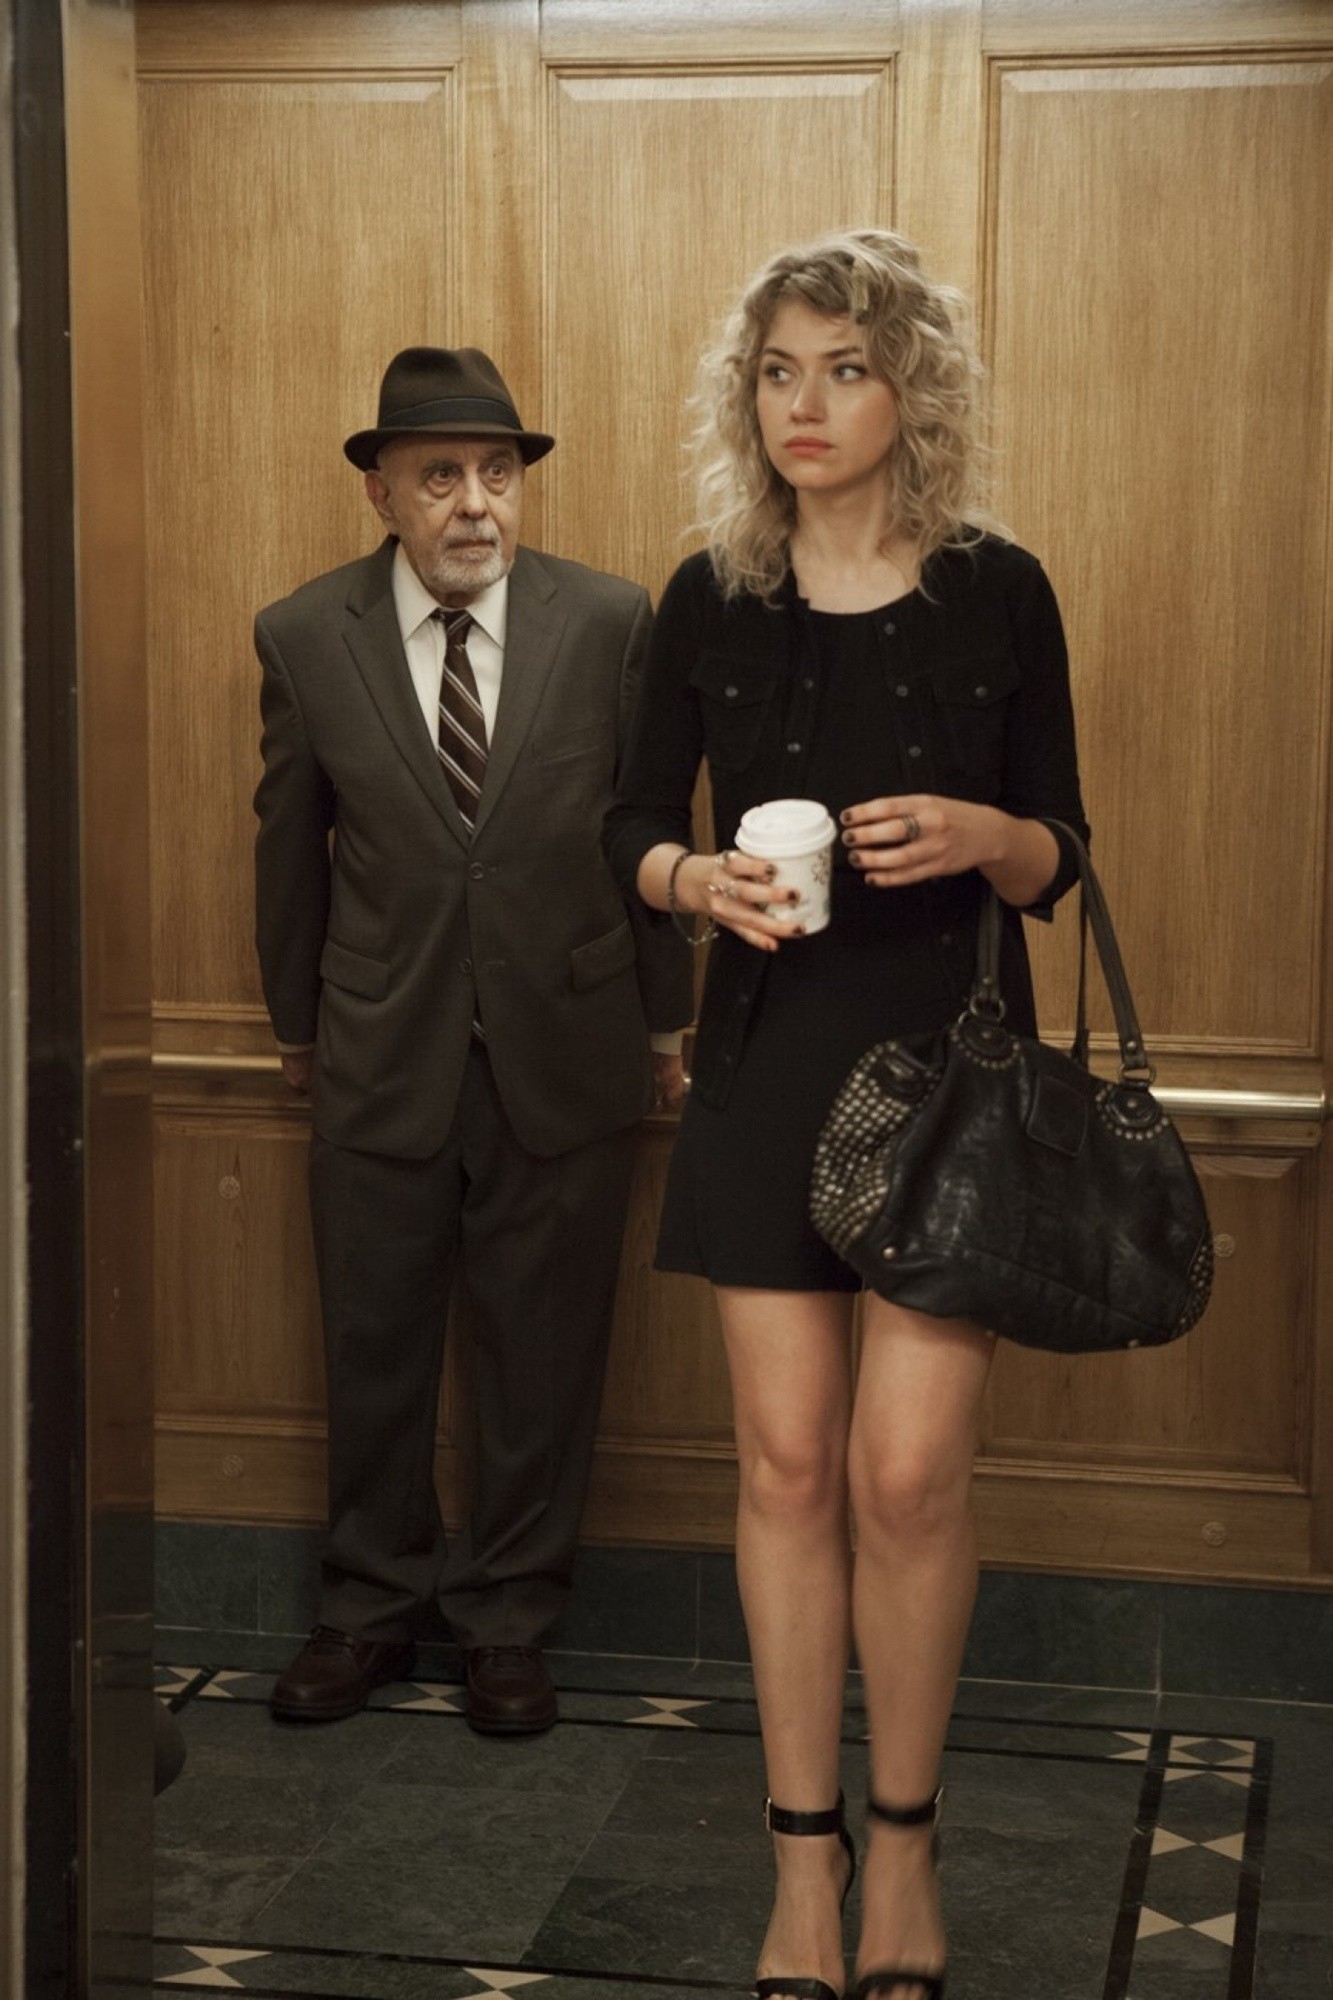 George Morfogen stars as Harold Fleet and Imogen Poots stars as Izzy in Clarius Entertainment's She's Funny That Way (2015)